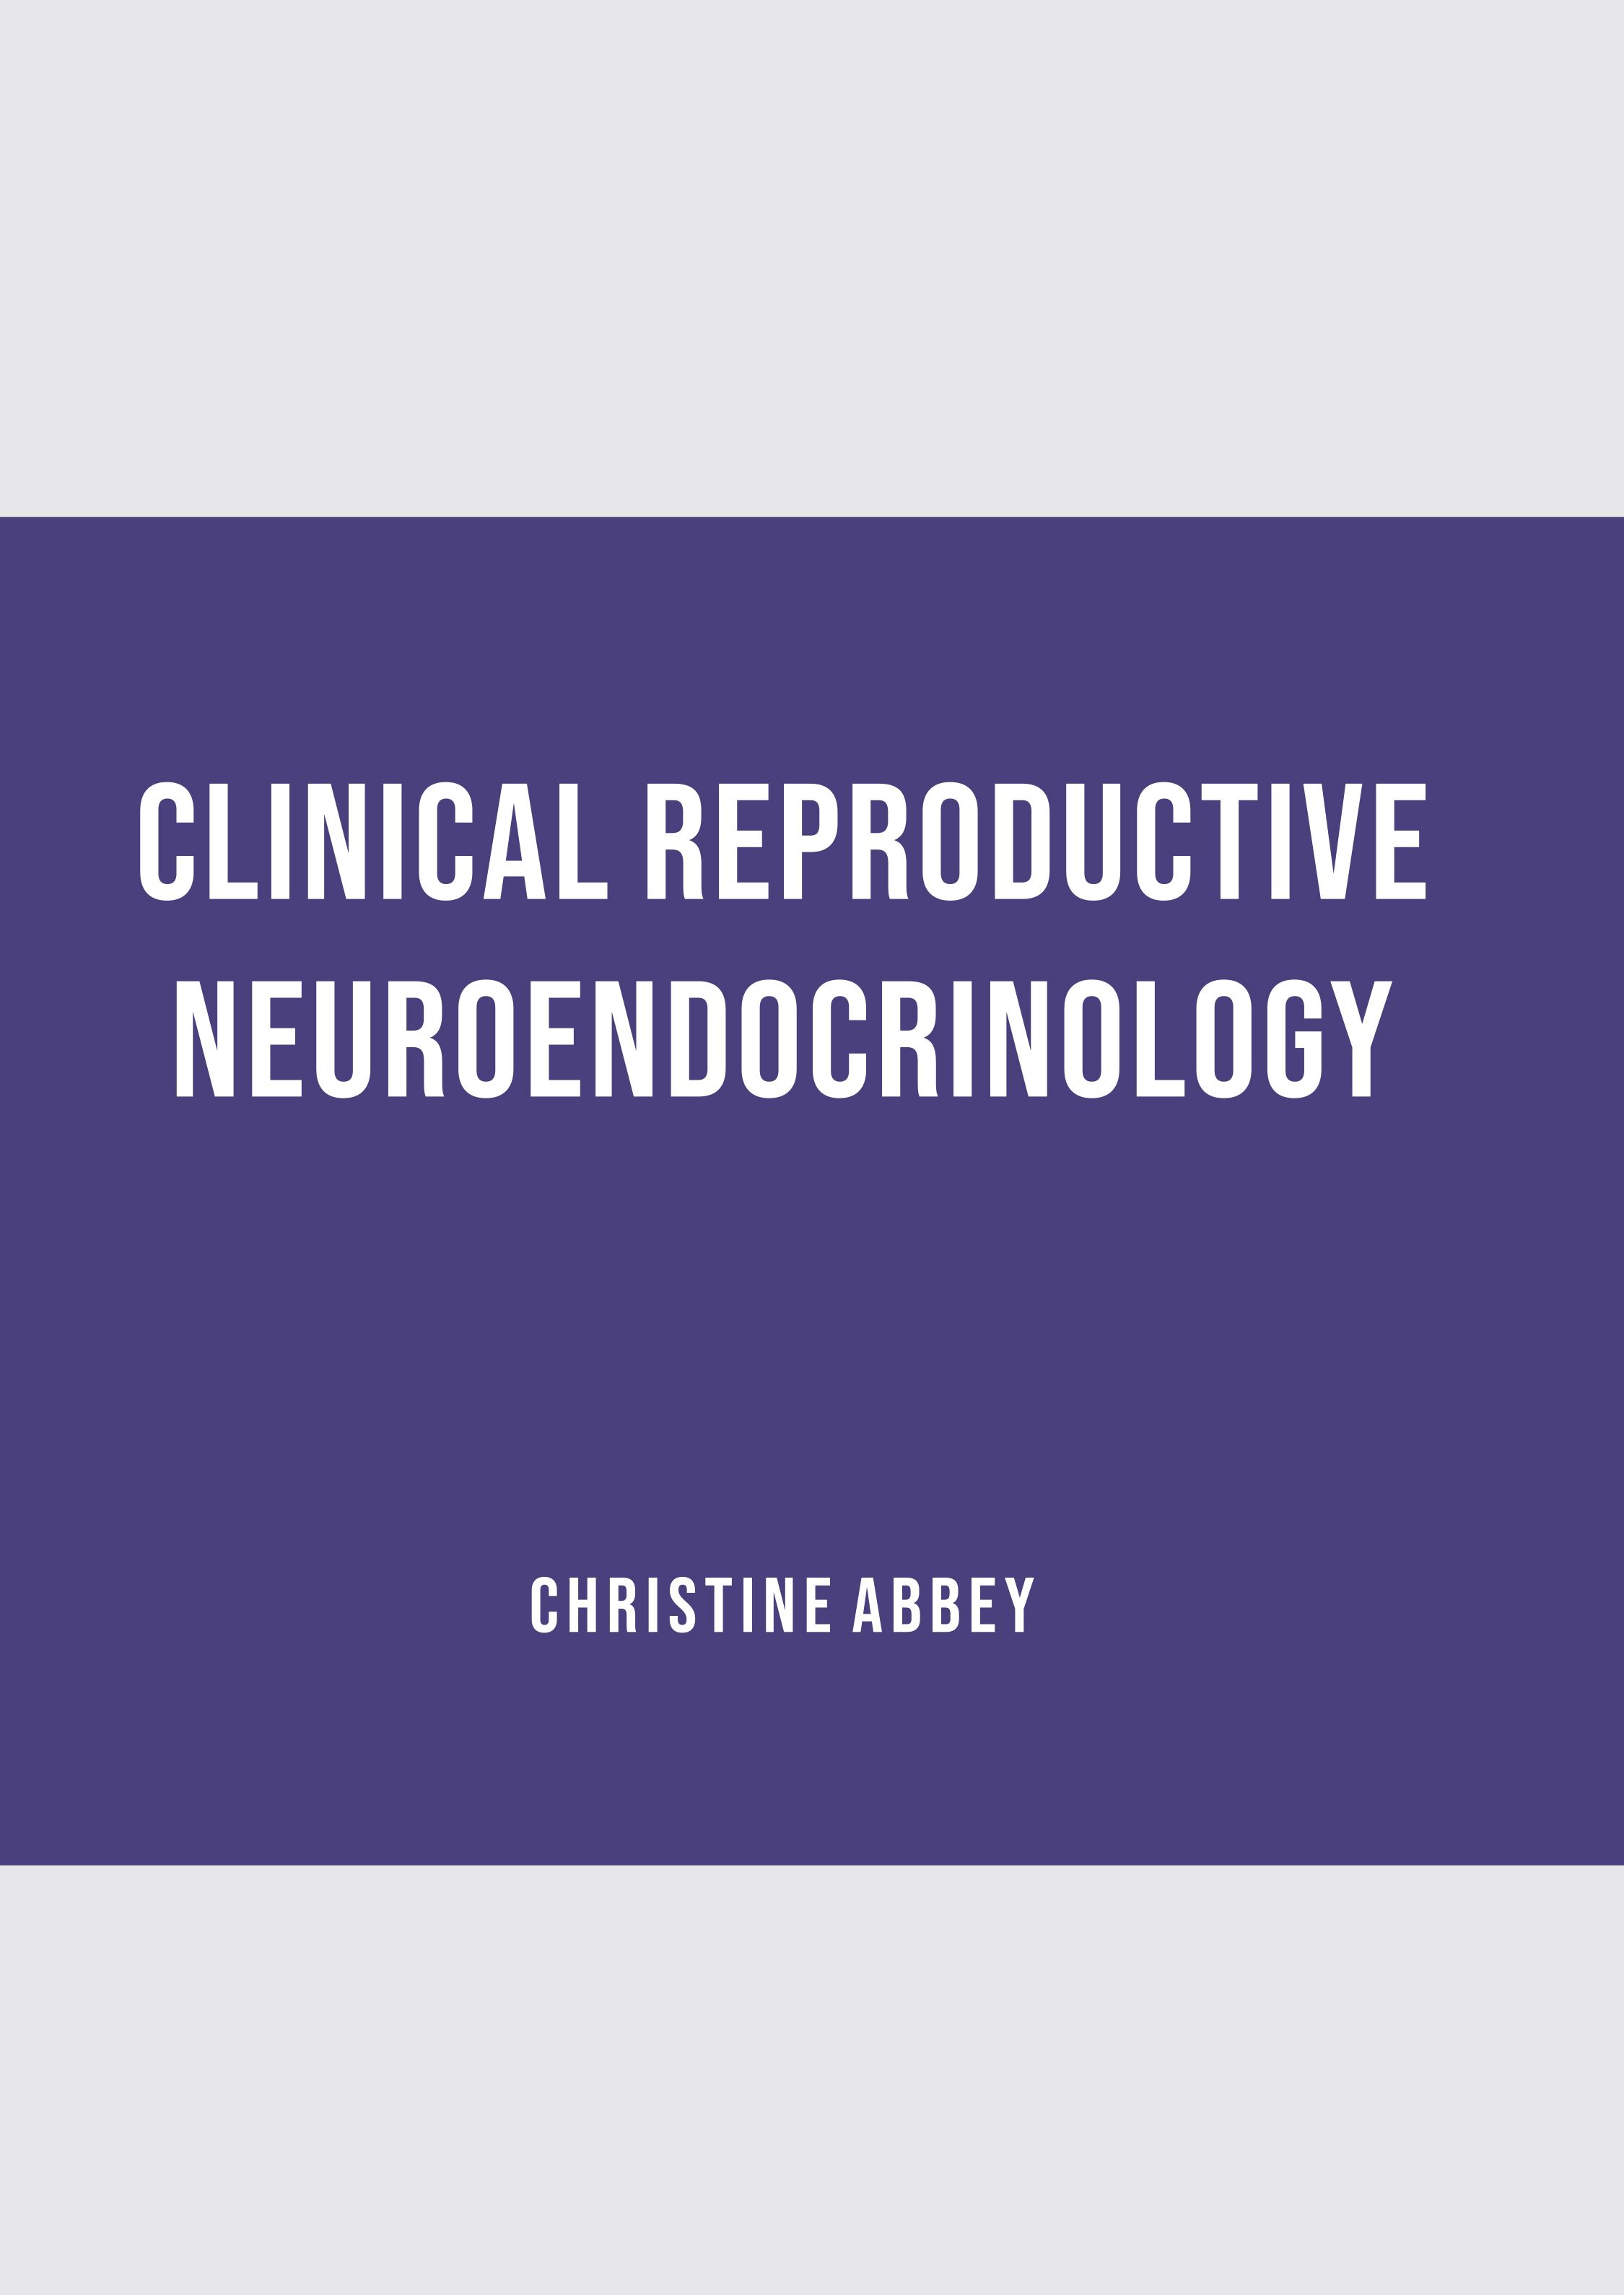 CLINICAL REPRODUCTIVE NEUROENDOCRINOLOGY